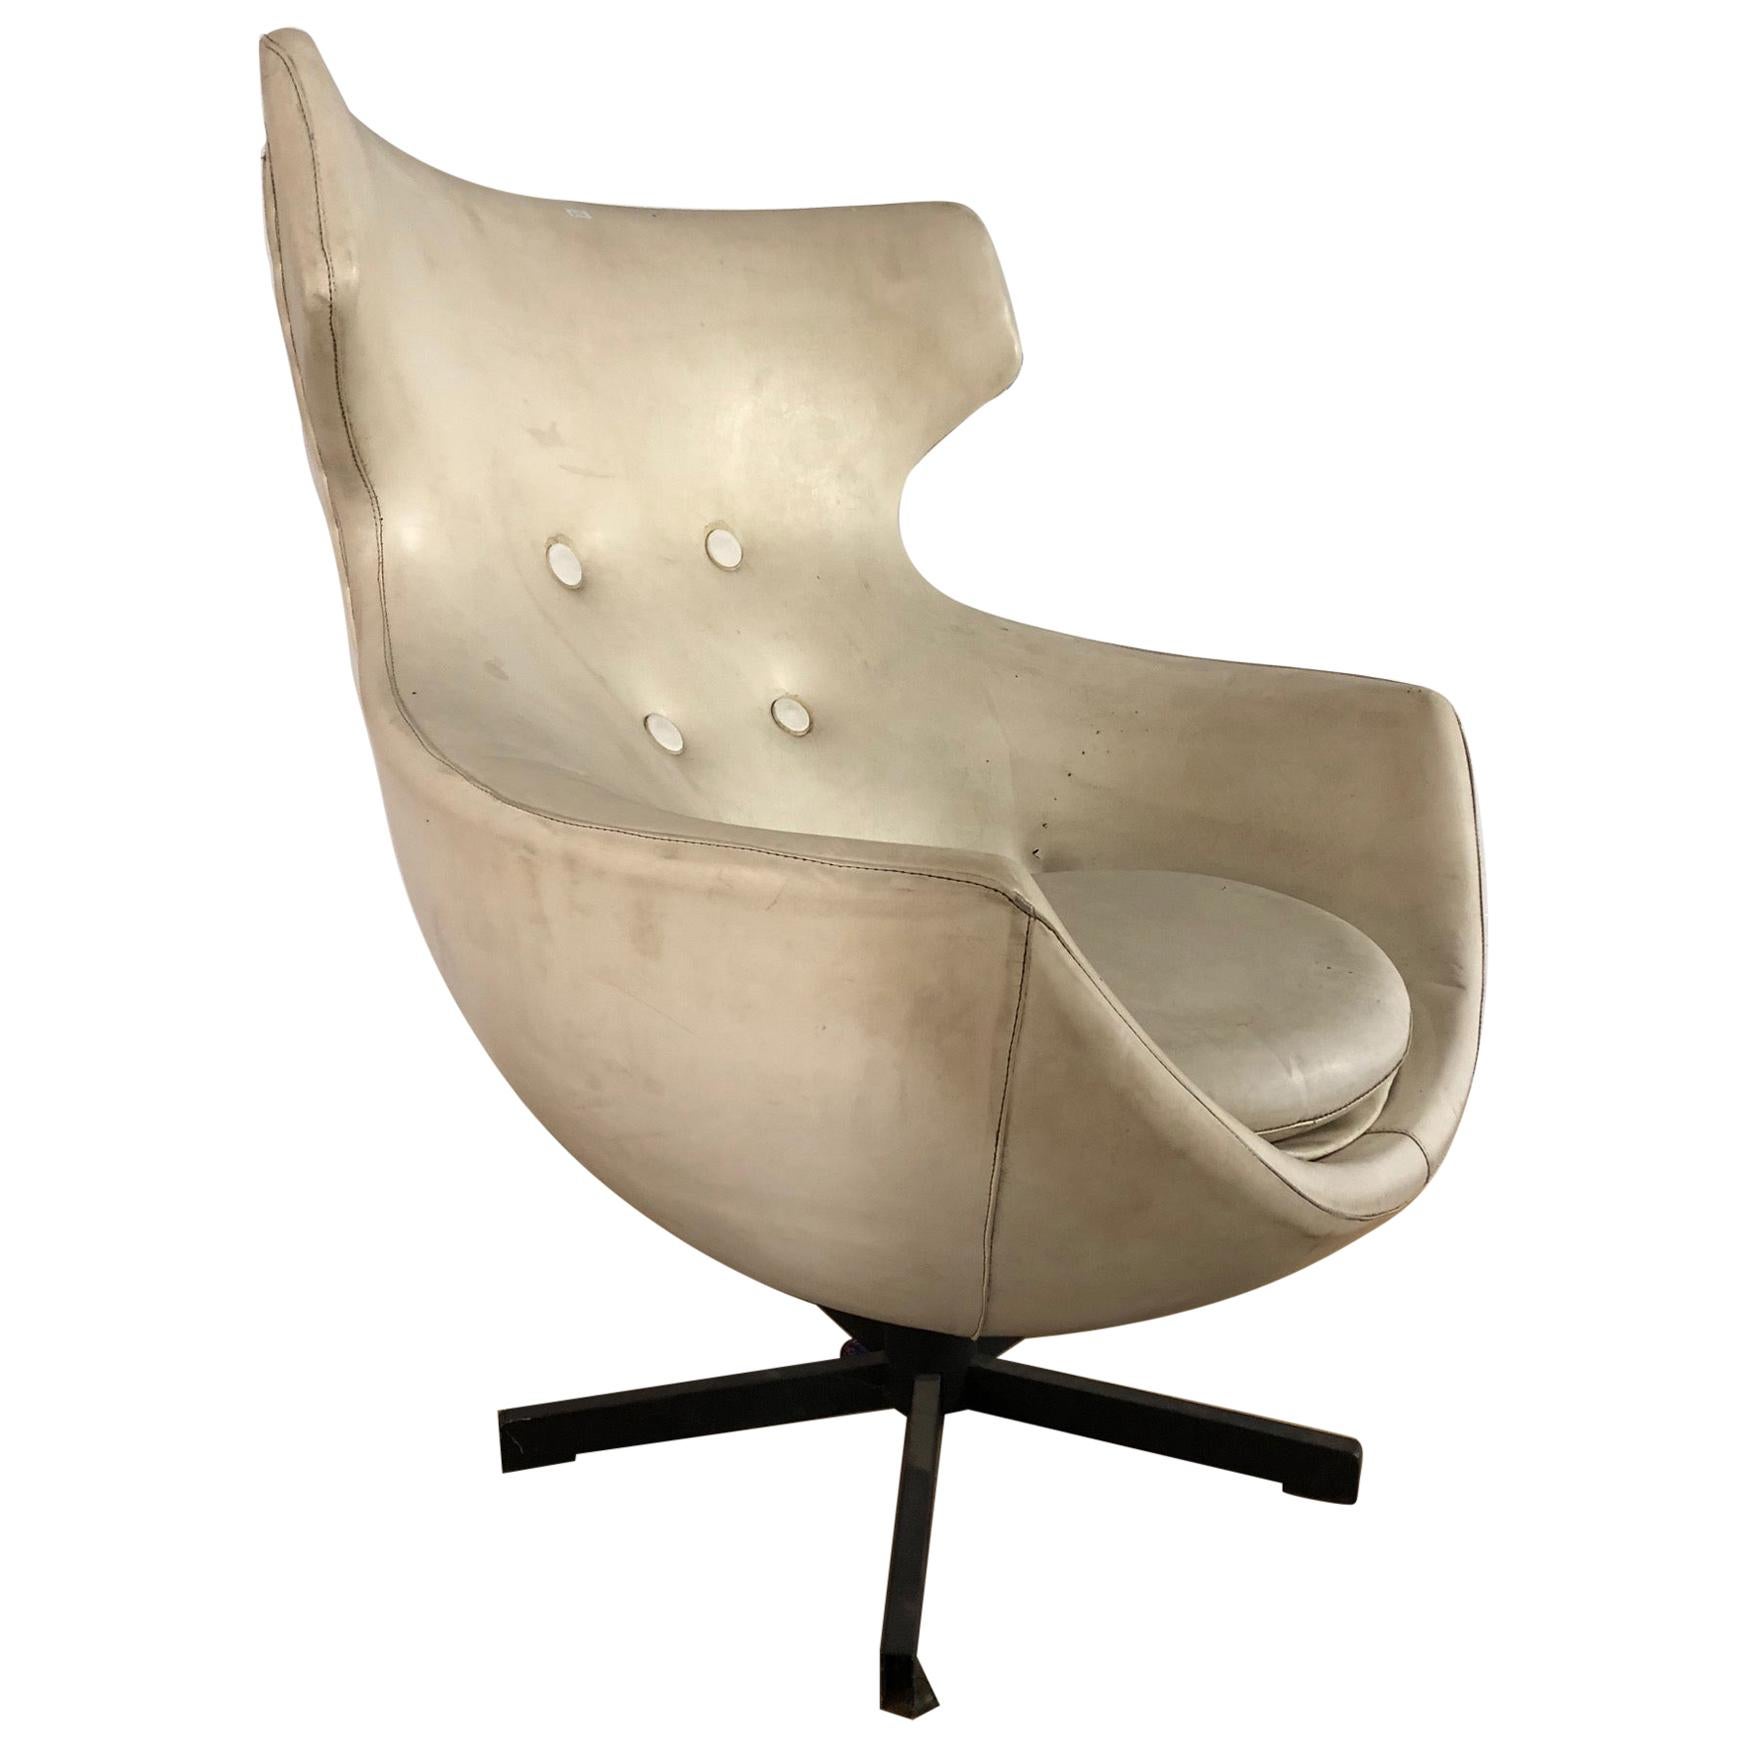 "Jupiter" Armchair by Pierre Guariche for Meurop, France, 1960s